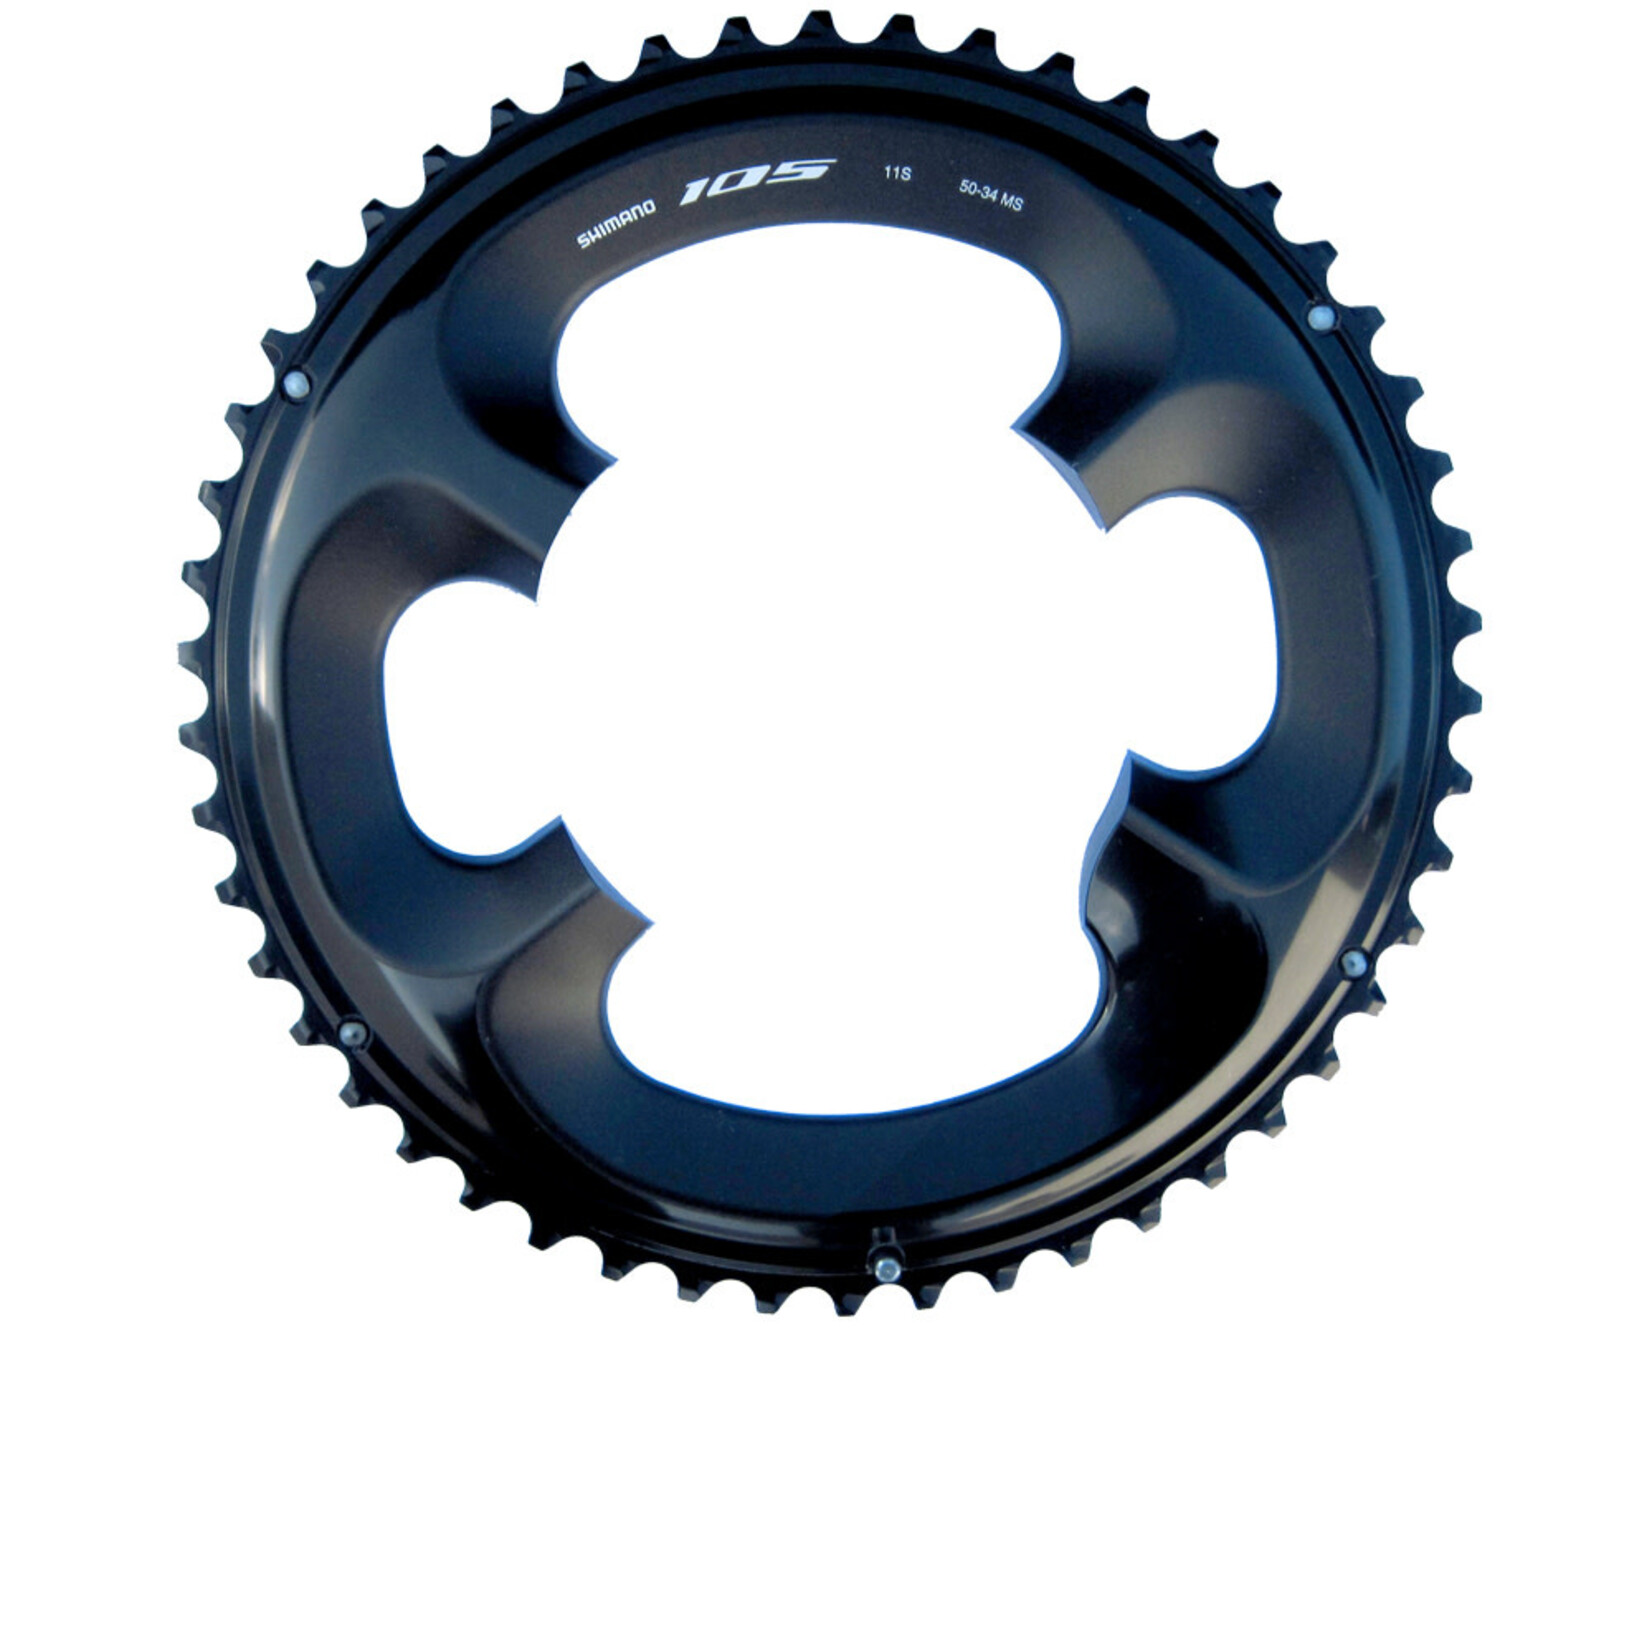 Shimano FC-R7000 CHAINRING 11 Speed 50T MS for 50-34T